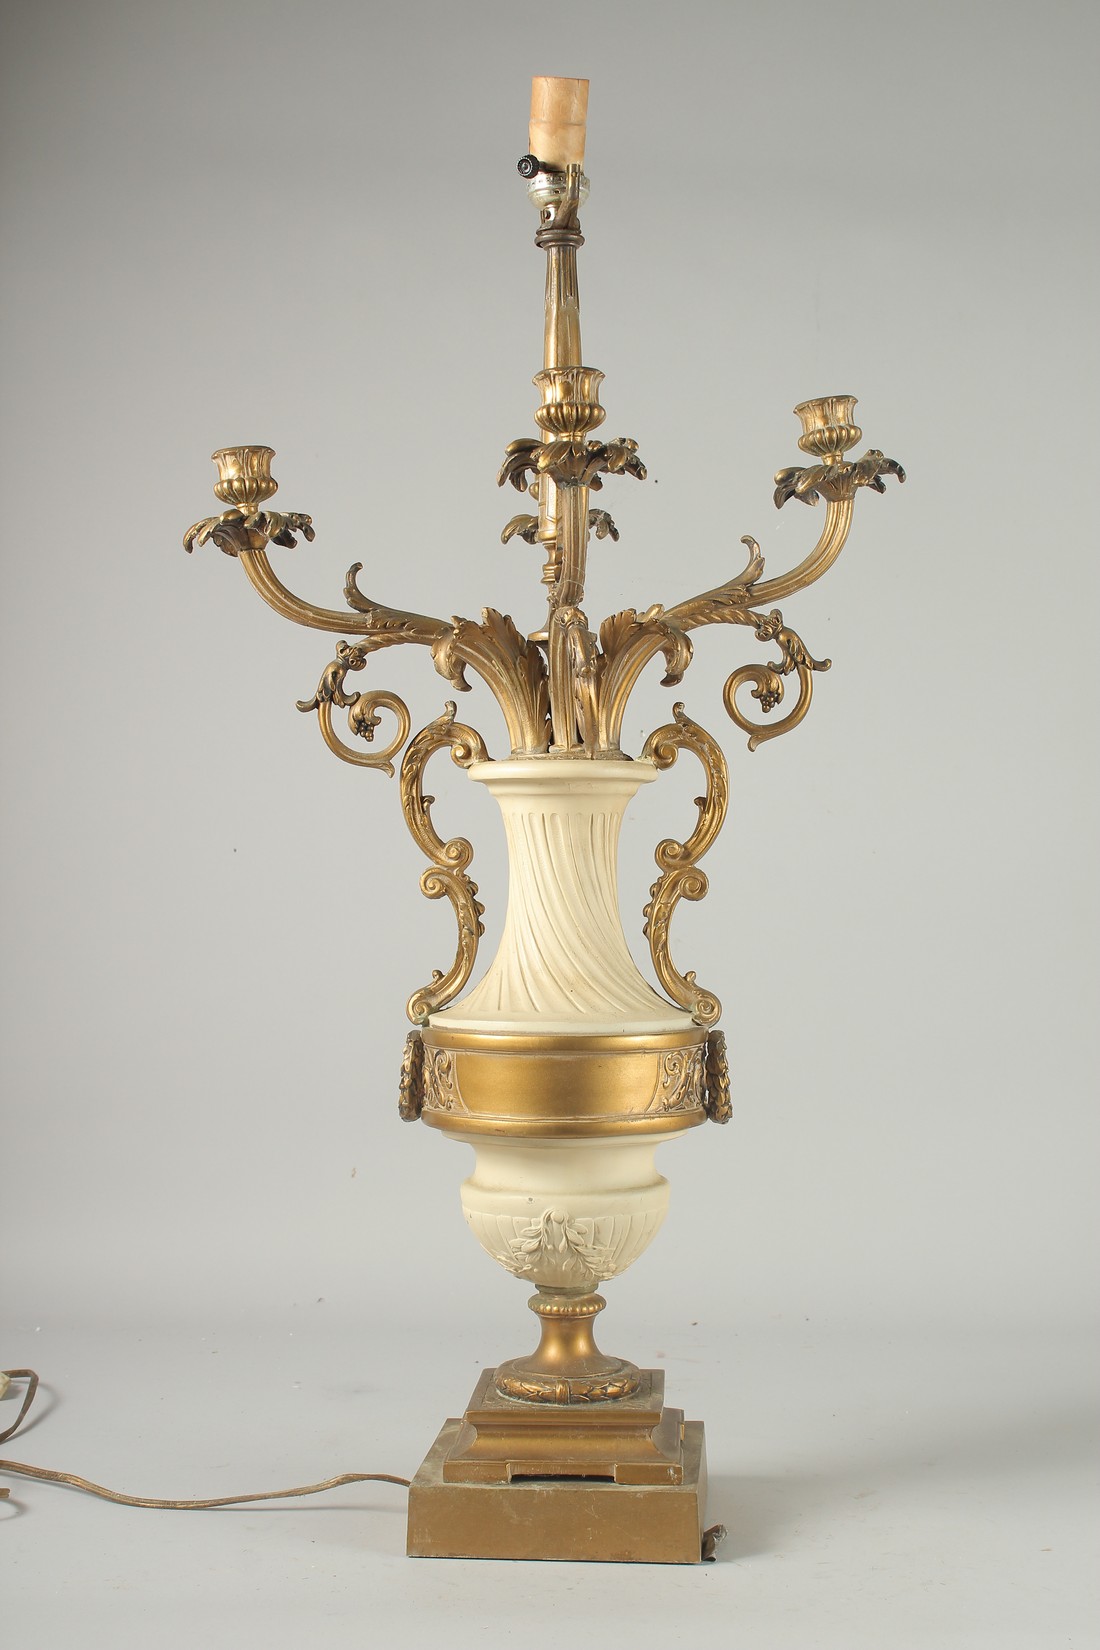 A 19TH CENTURY FRENCH WHITE MARBLE AND FOUR BRANCH ORMOLU LAMP on a square base. 29ins high.